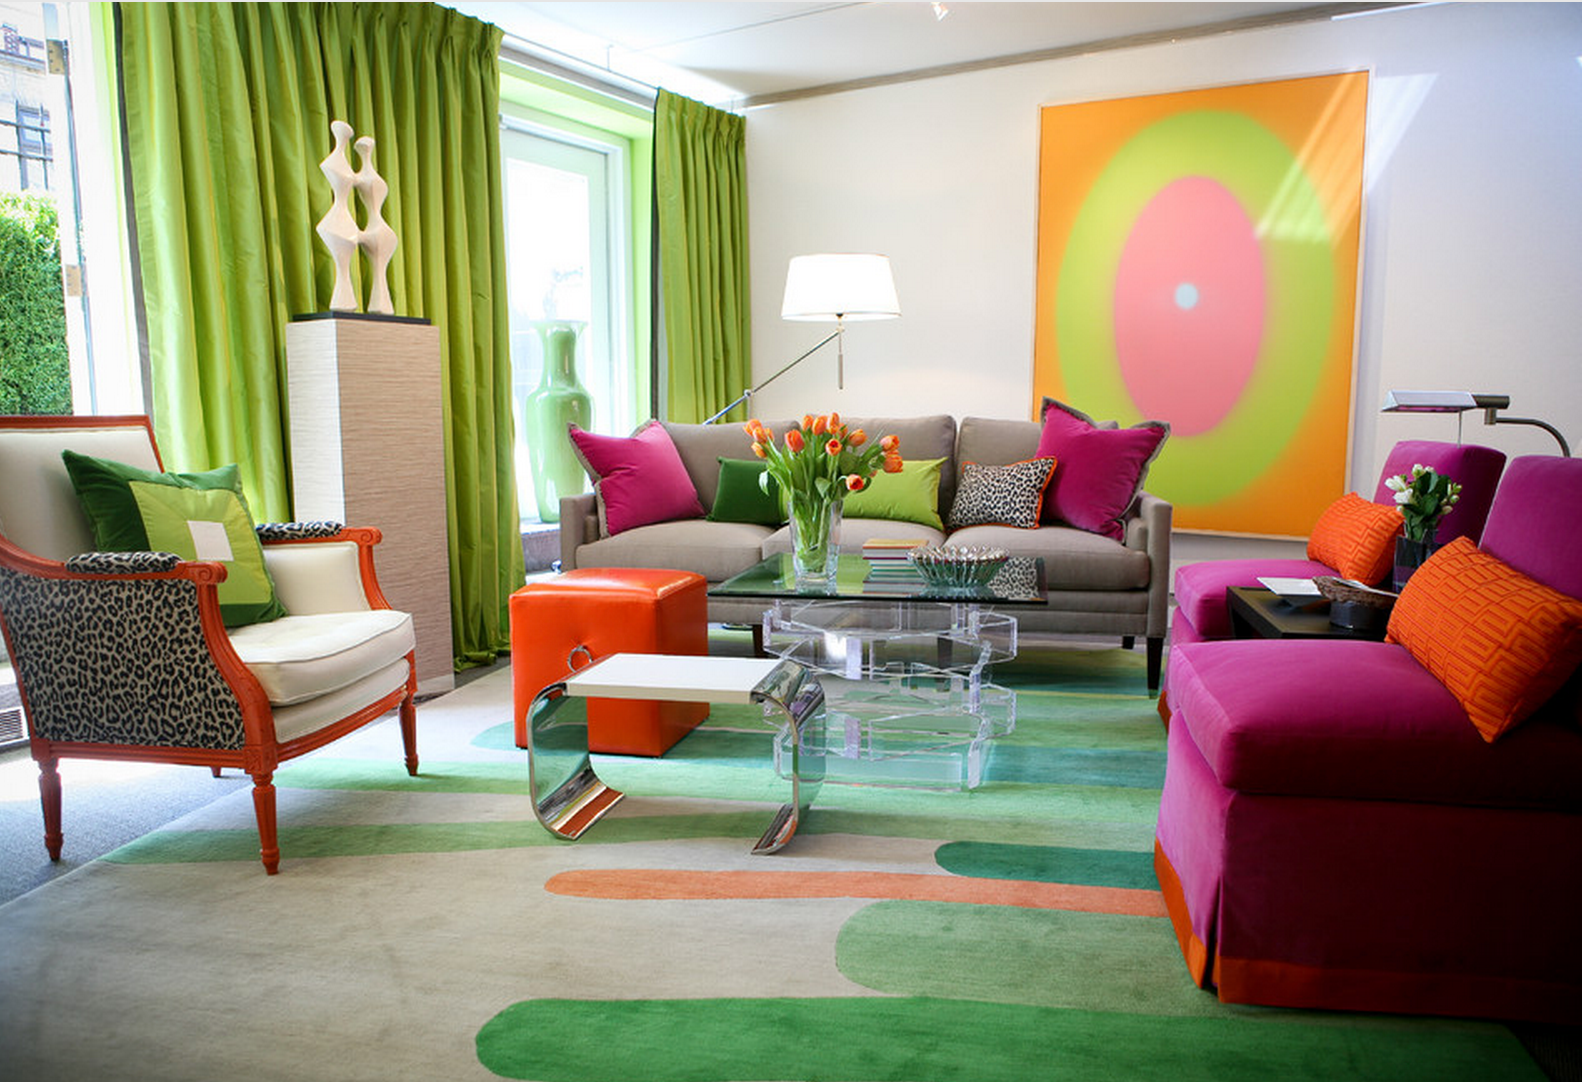 Bright Colored Style in the Living Room